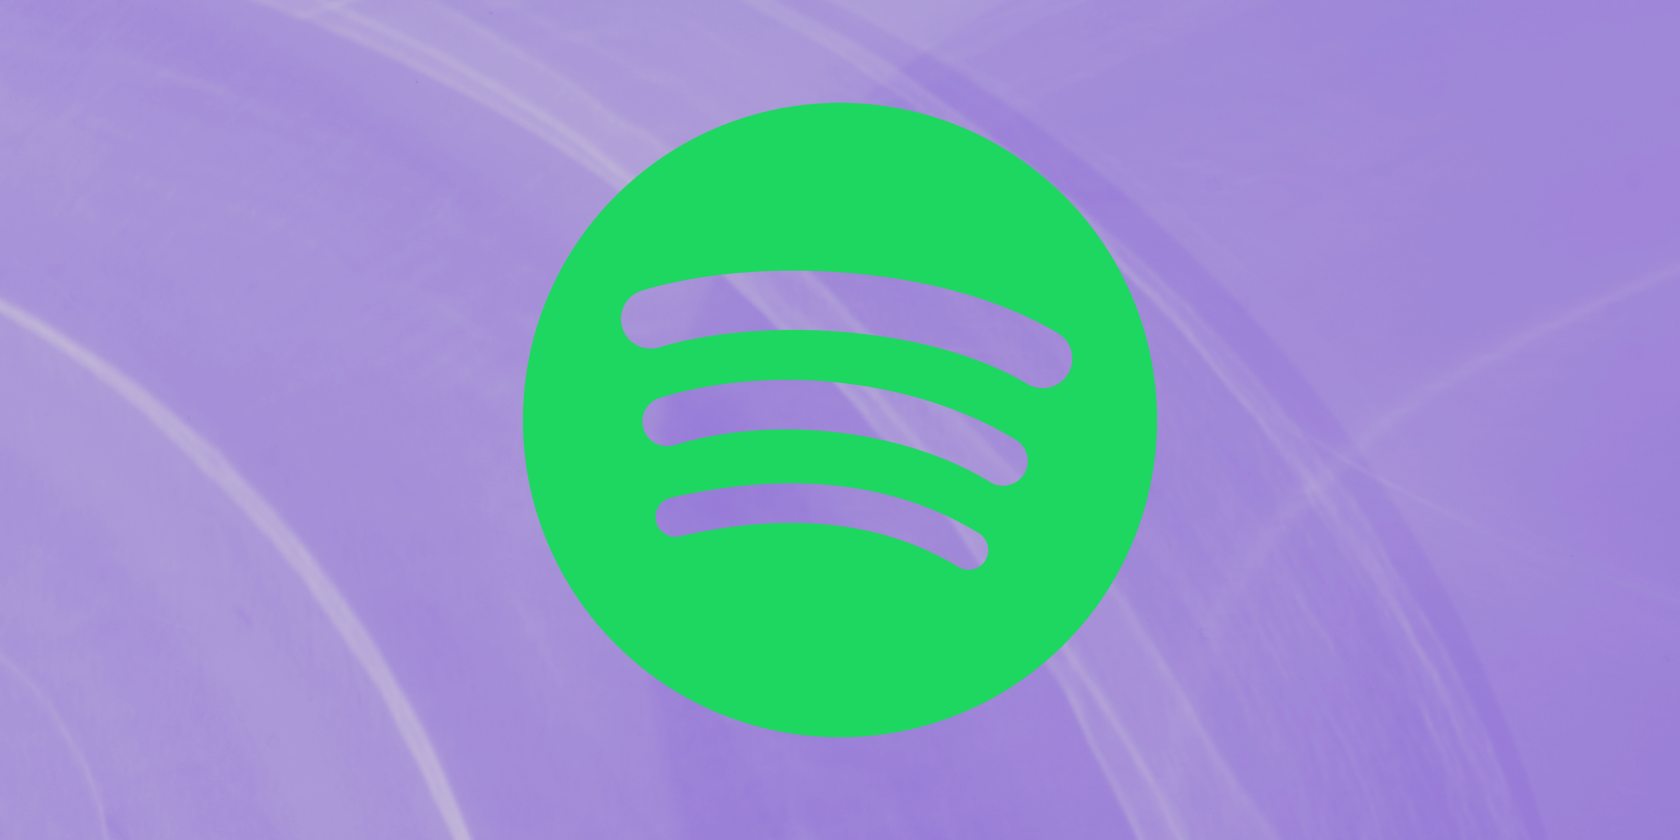 Spotify Launches Redesigned Desktop App and Web Player